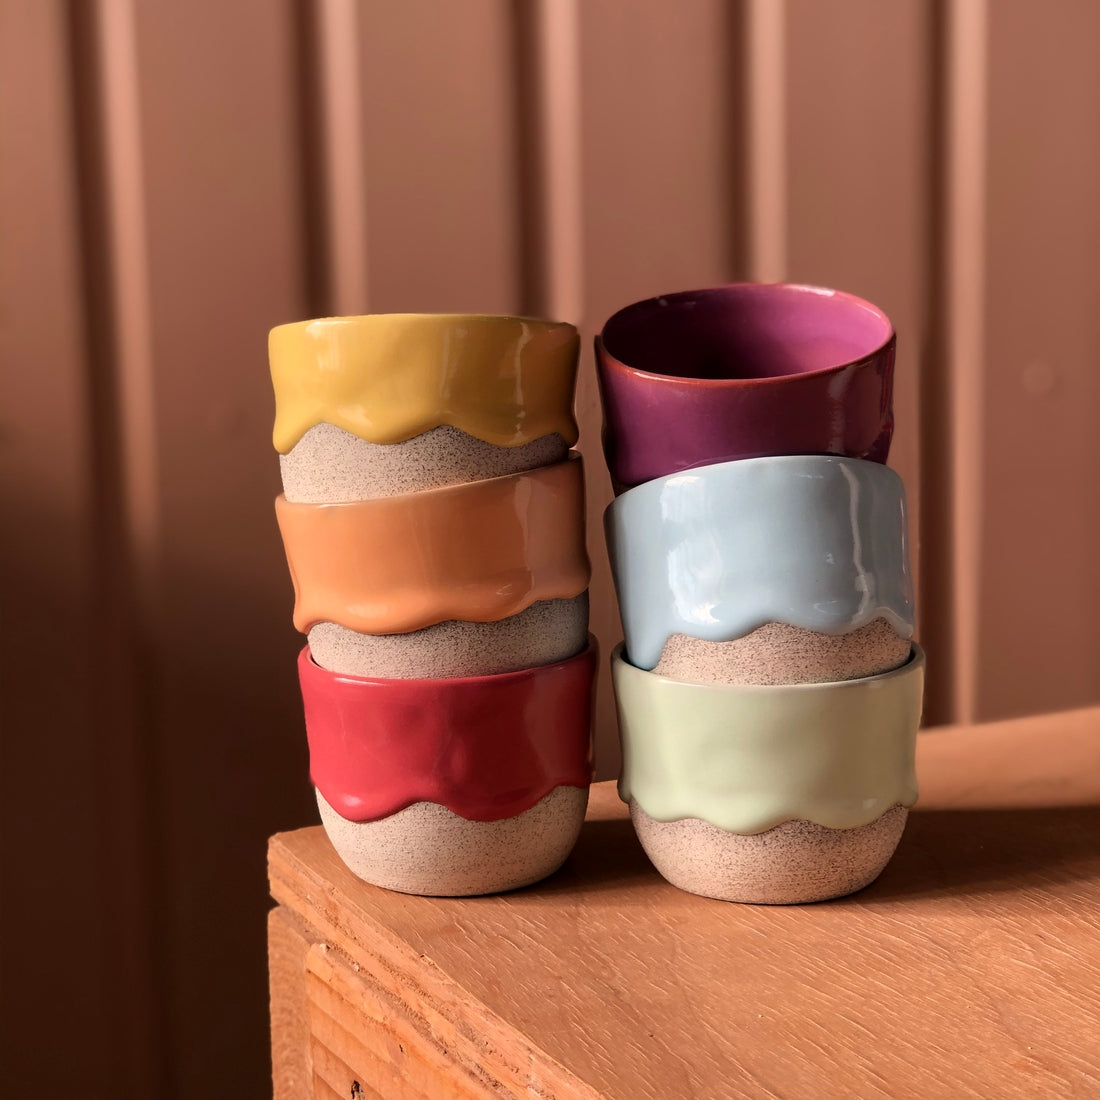 2 Stacks of Brian Giniewski Oolong Ceramic Drippy Mugs in a Rainbow of Colors